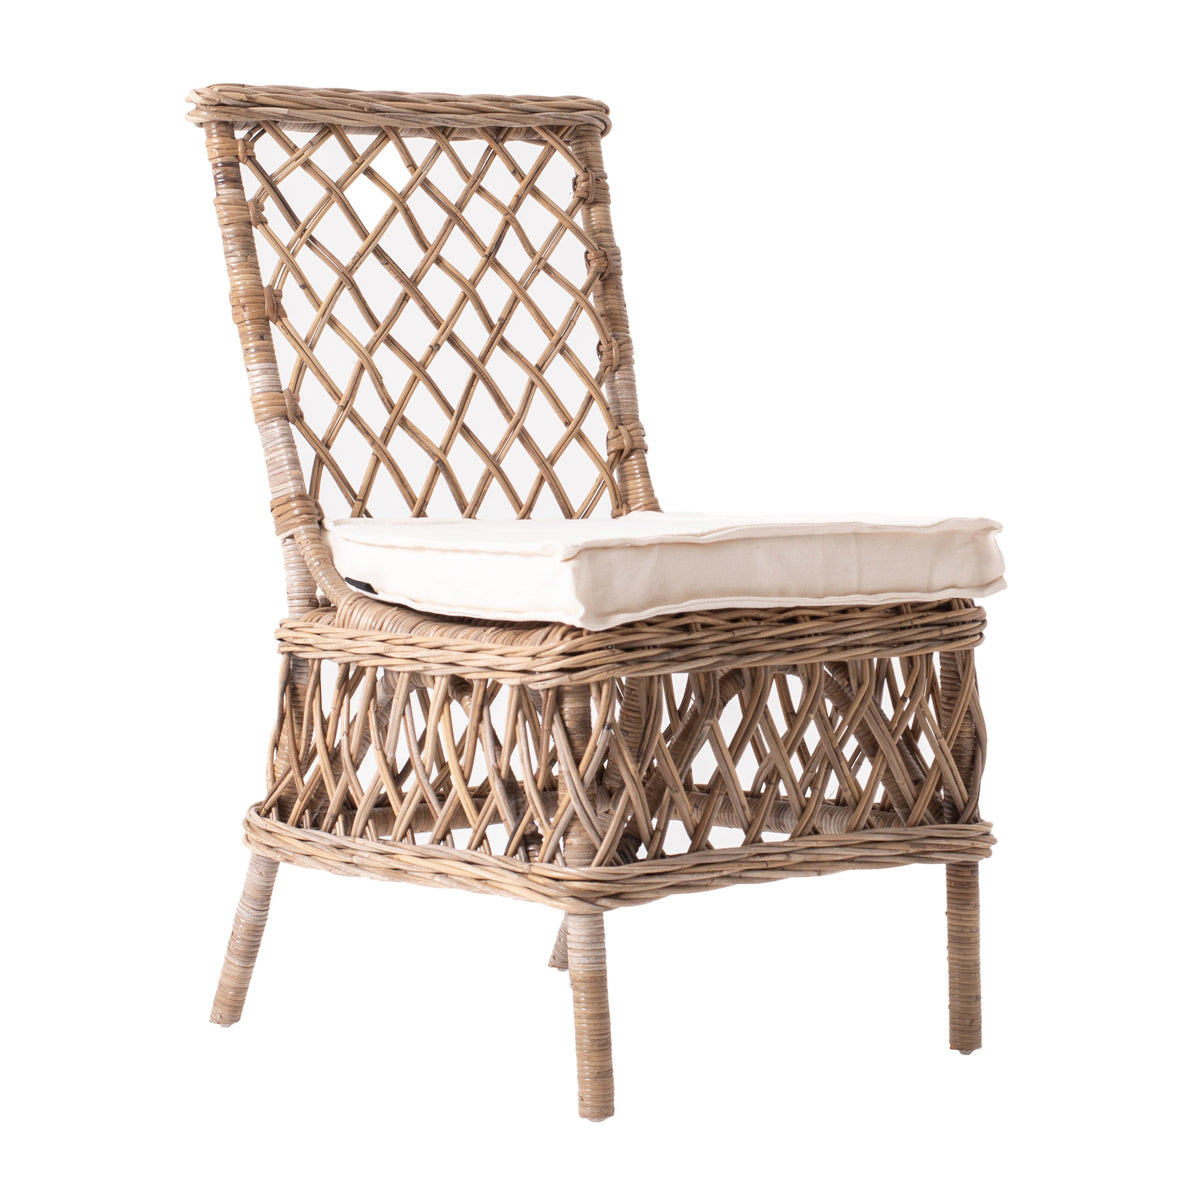 Set Of Two Lattice Weave Wicker Chairs With Seat Cushion